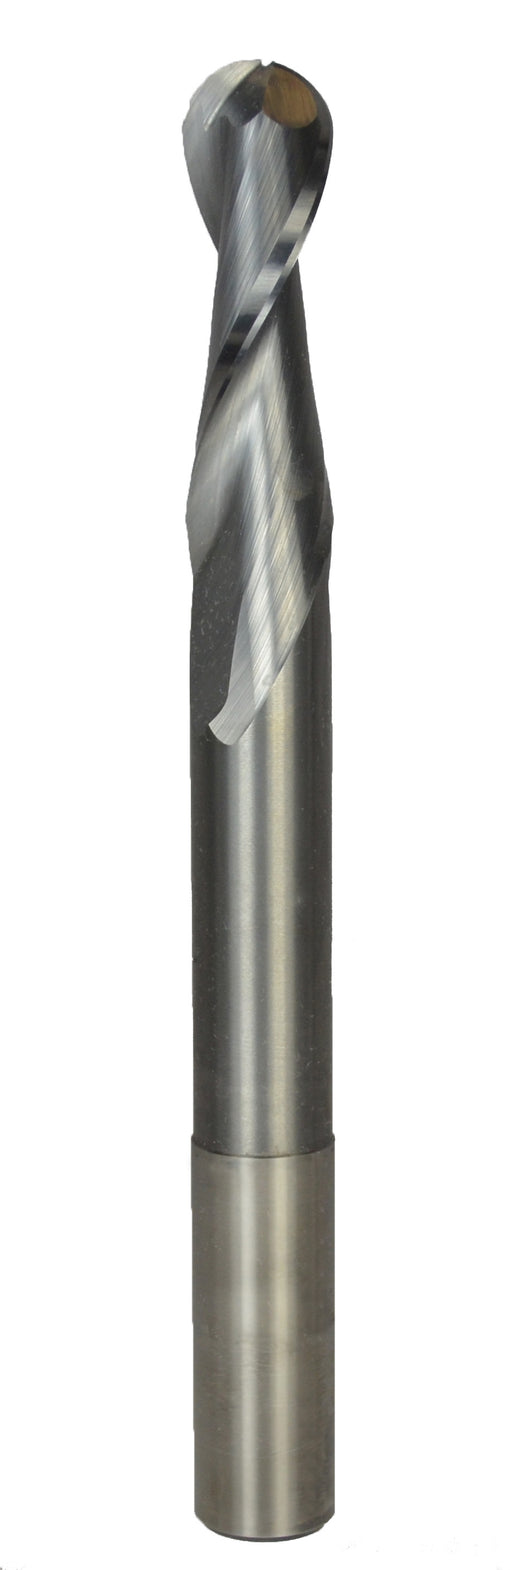 Solid Tungsten Spiral Upcut Ballnose Cutter - 2 Flute - Metric Range - Extra Long Series - tungstenandtool